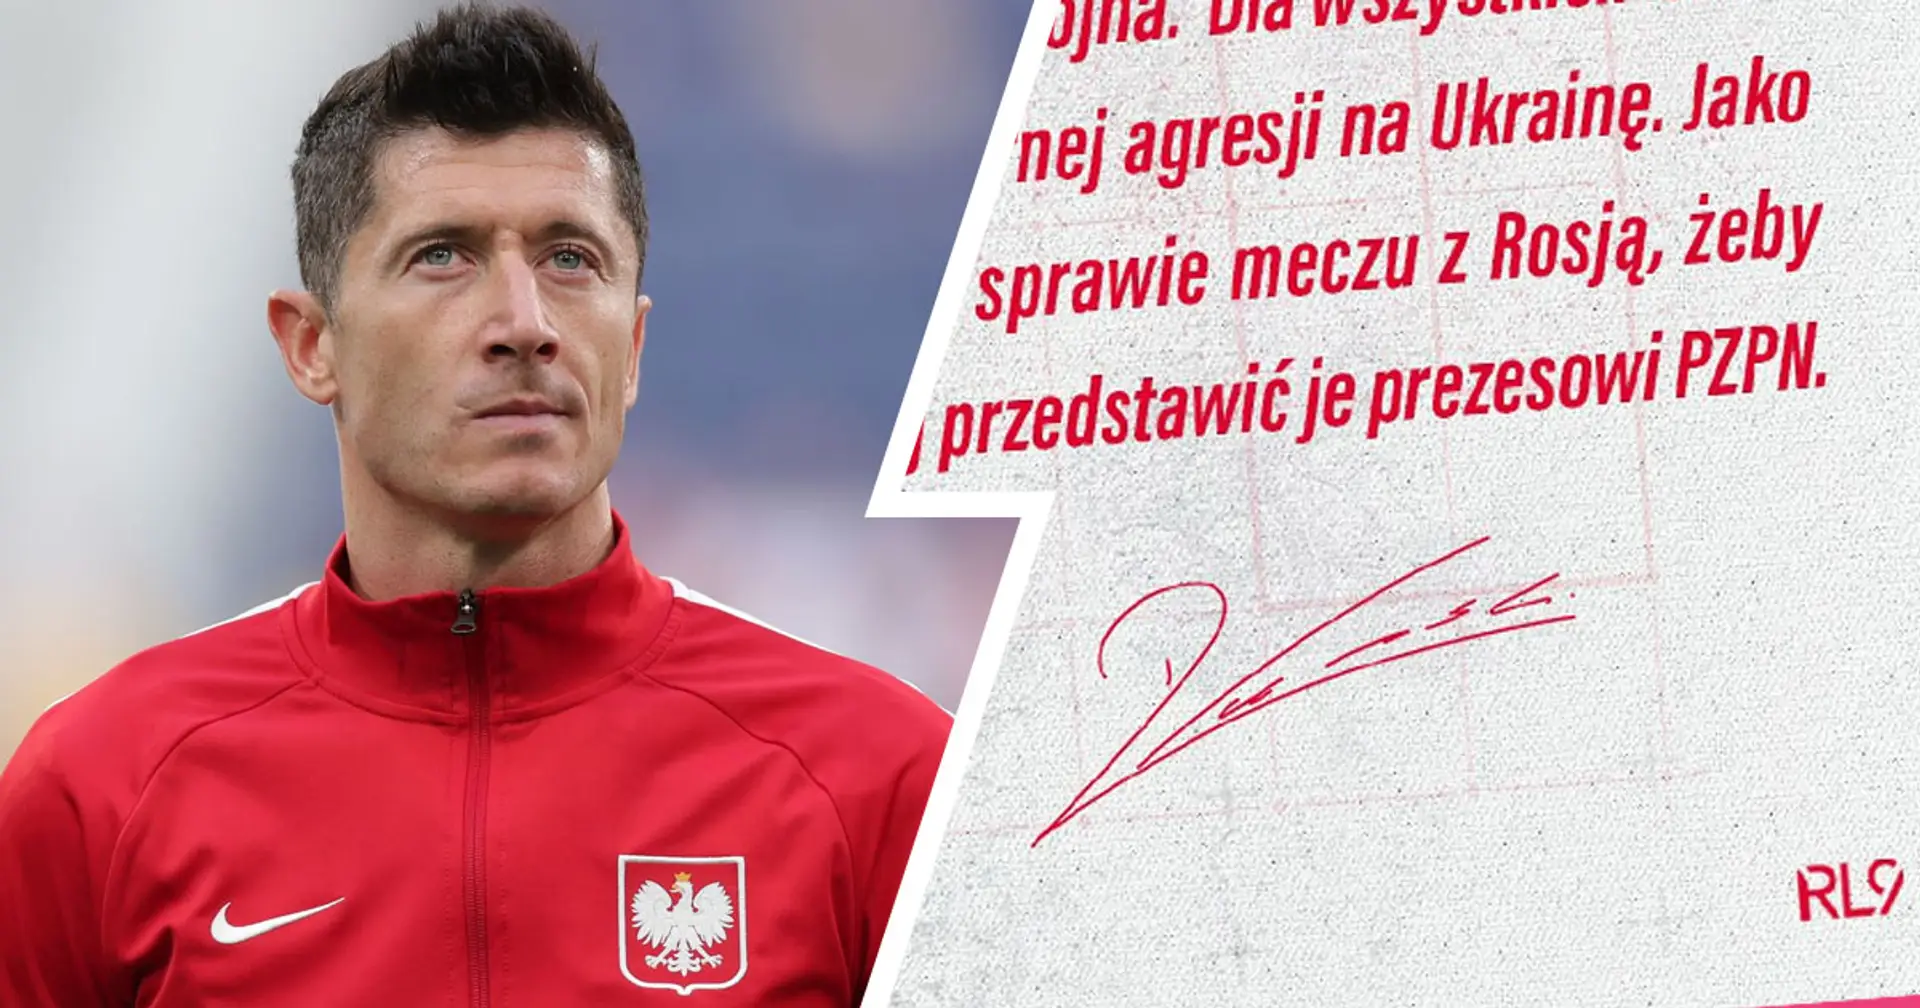 'Everything that is beautiful in sports is contradictory to what war brings': Lewandowski sends powerful message amid Ukraine crisis